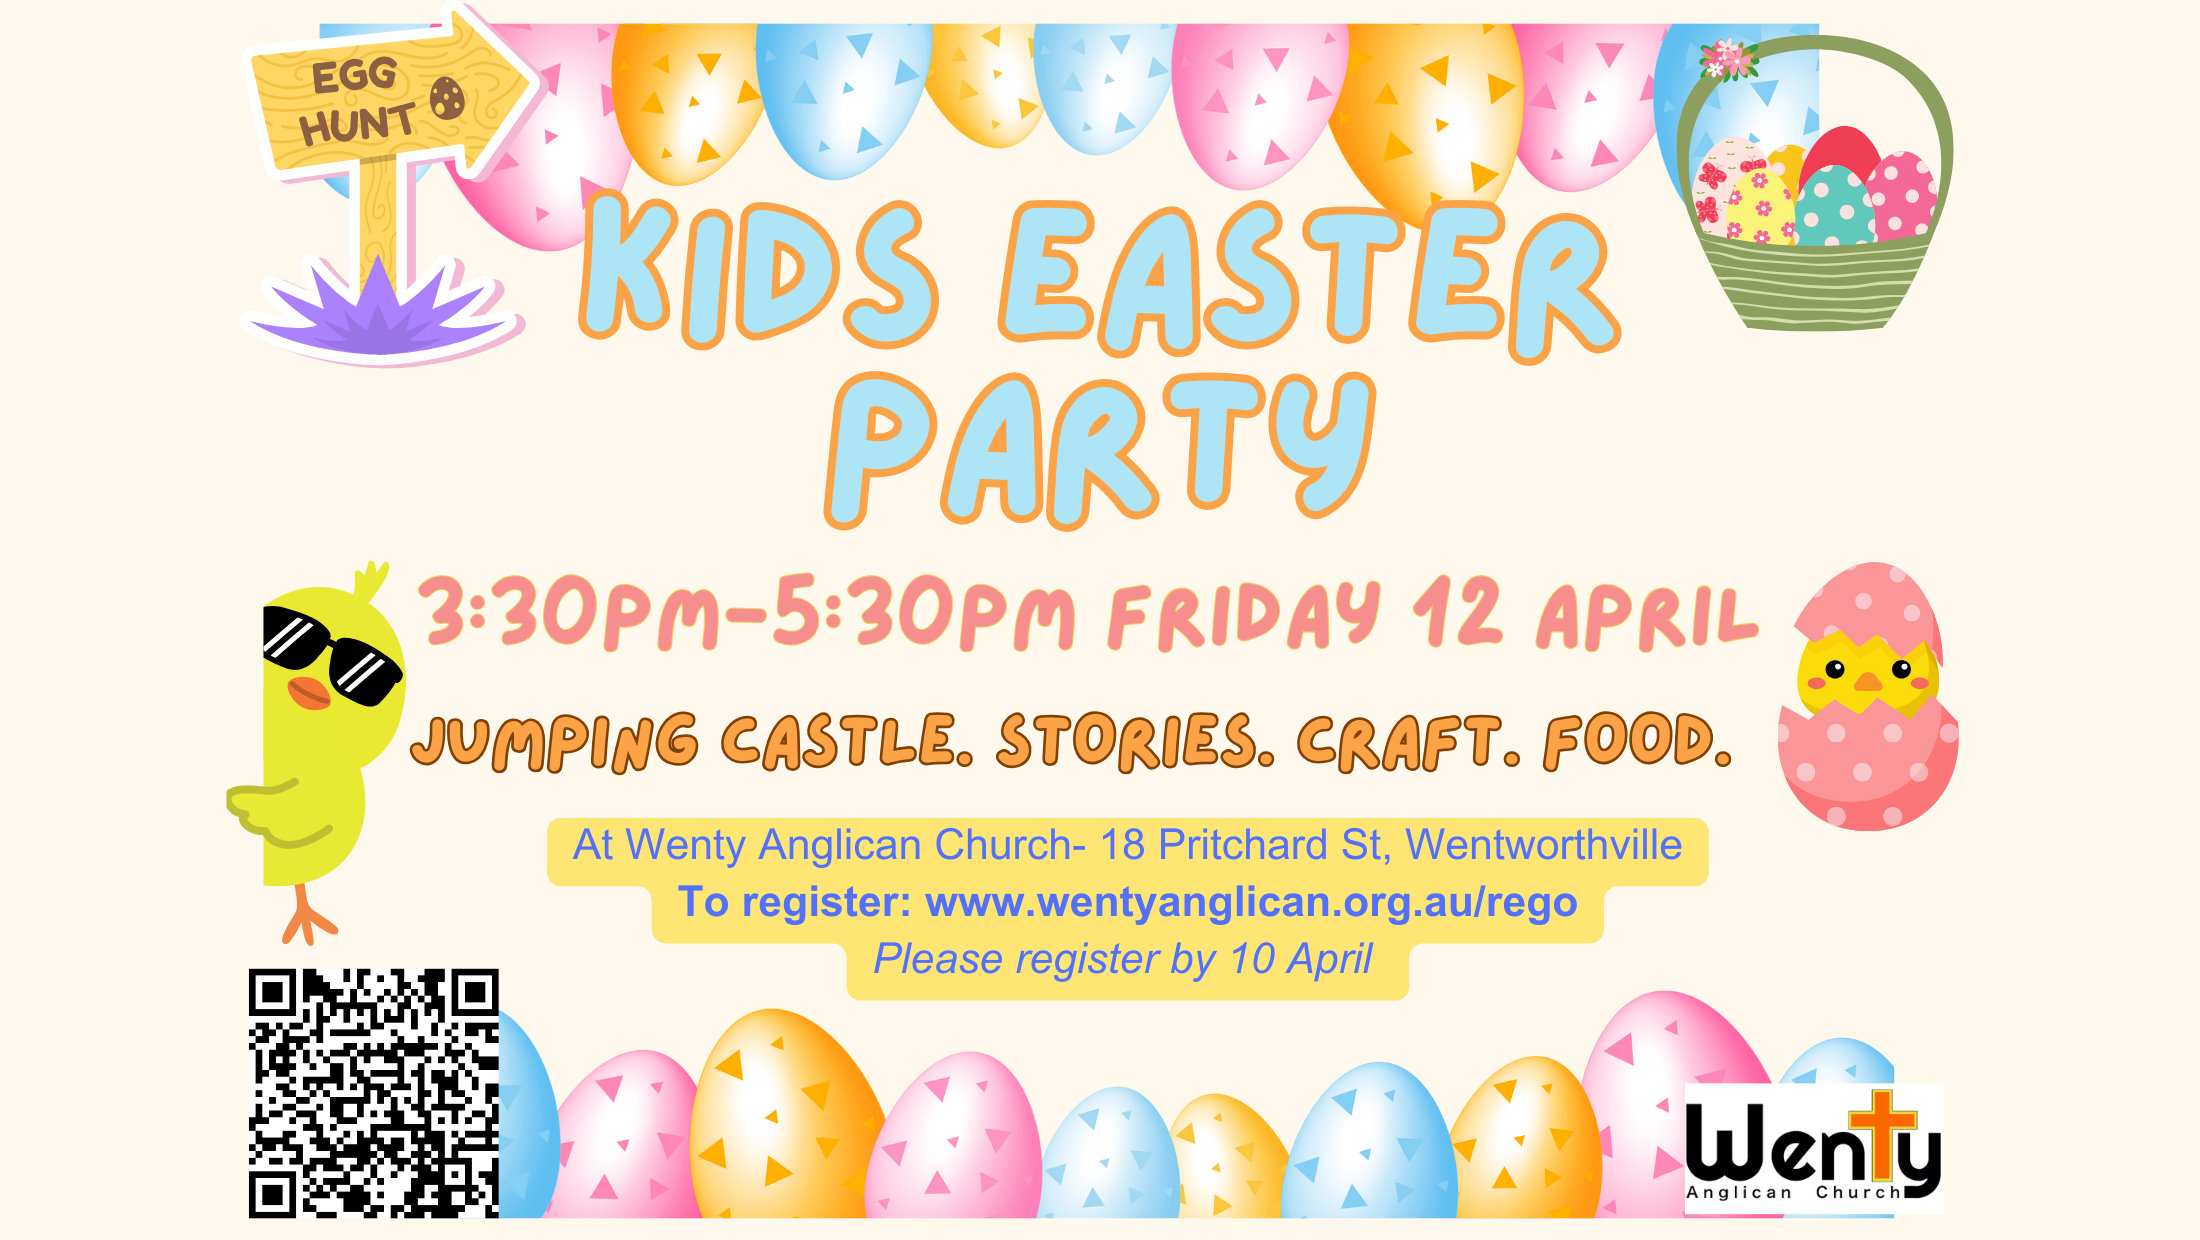 Kids Easter Party. 3:30pm-5:30pm Friday 12 April. Jumping Castle. Stories. Craft. Food. Register by 10th April.